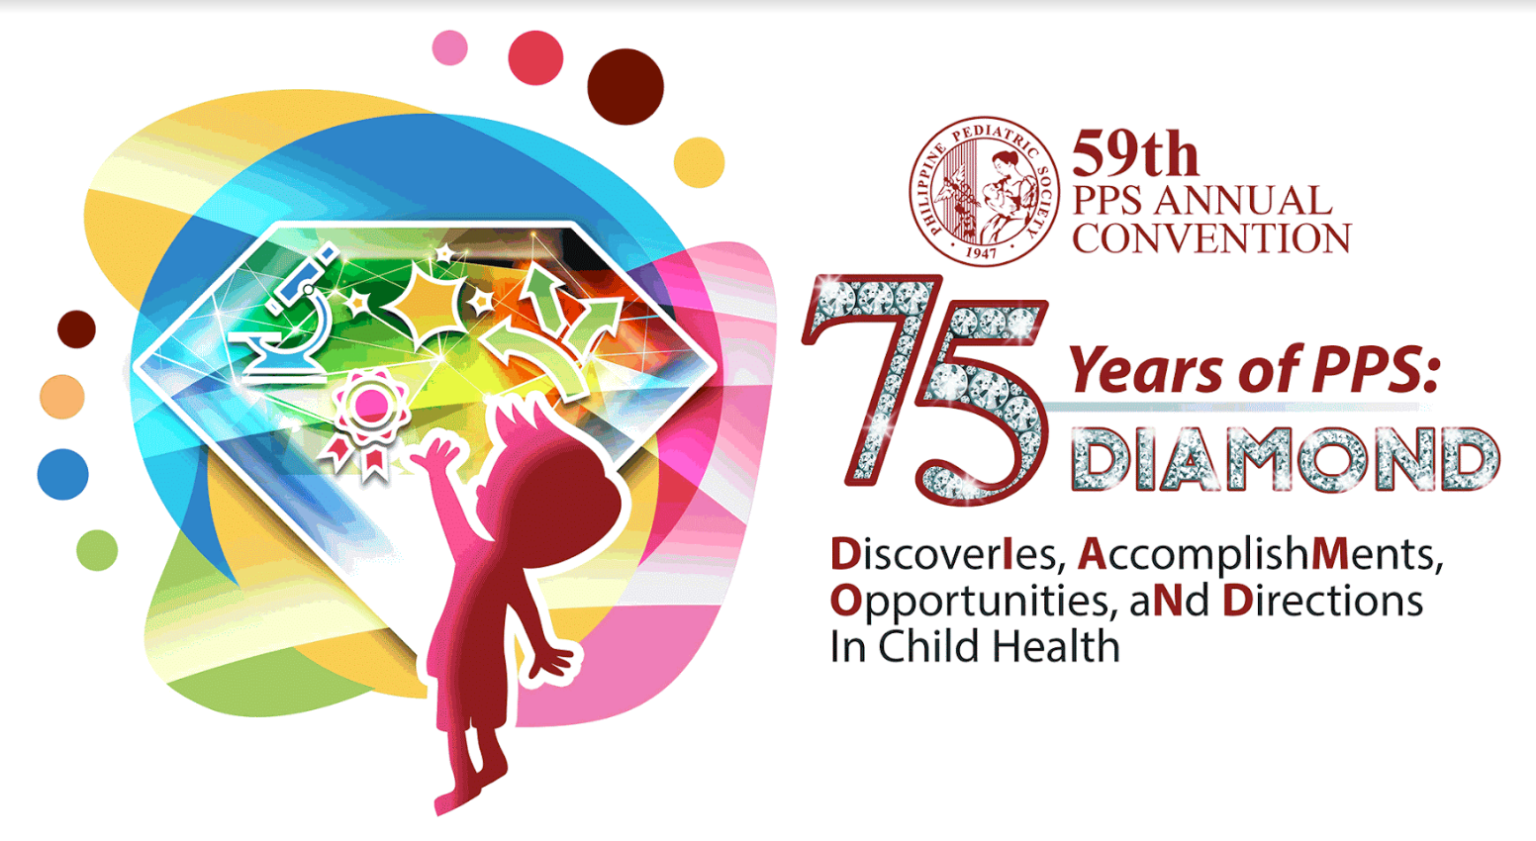 59th PPS Annual Convention Philippine Pediatric Society, Inc.